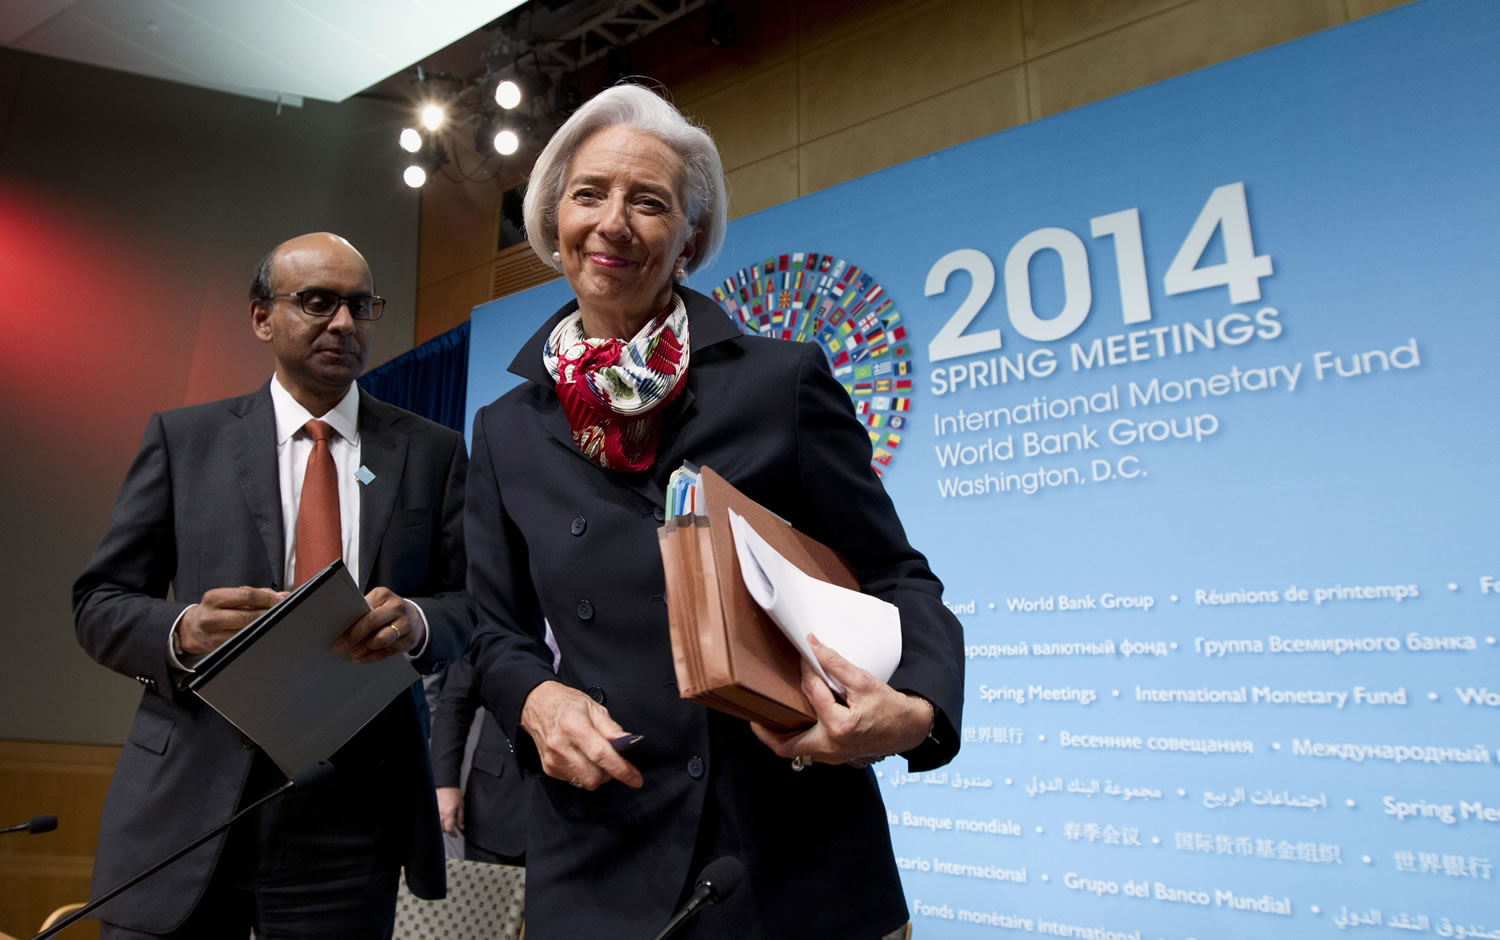 IMF Managing Director Christine Lagarde:
&quot;We are moving into a strengthening phase.&quot;